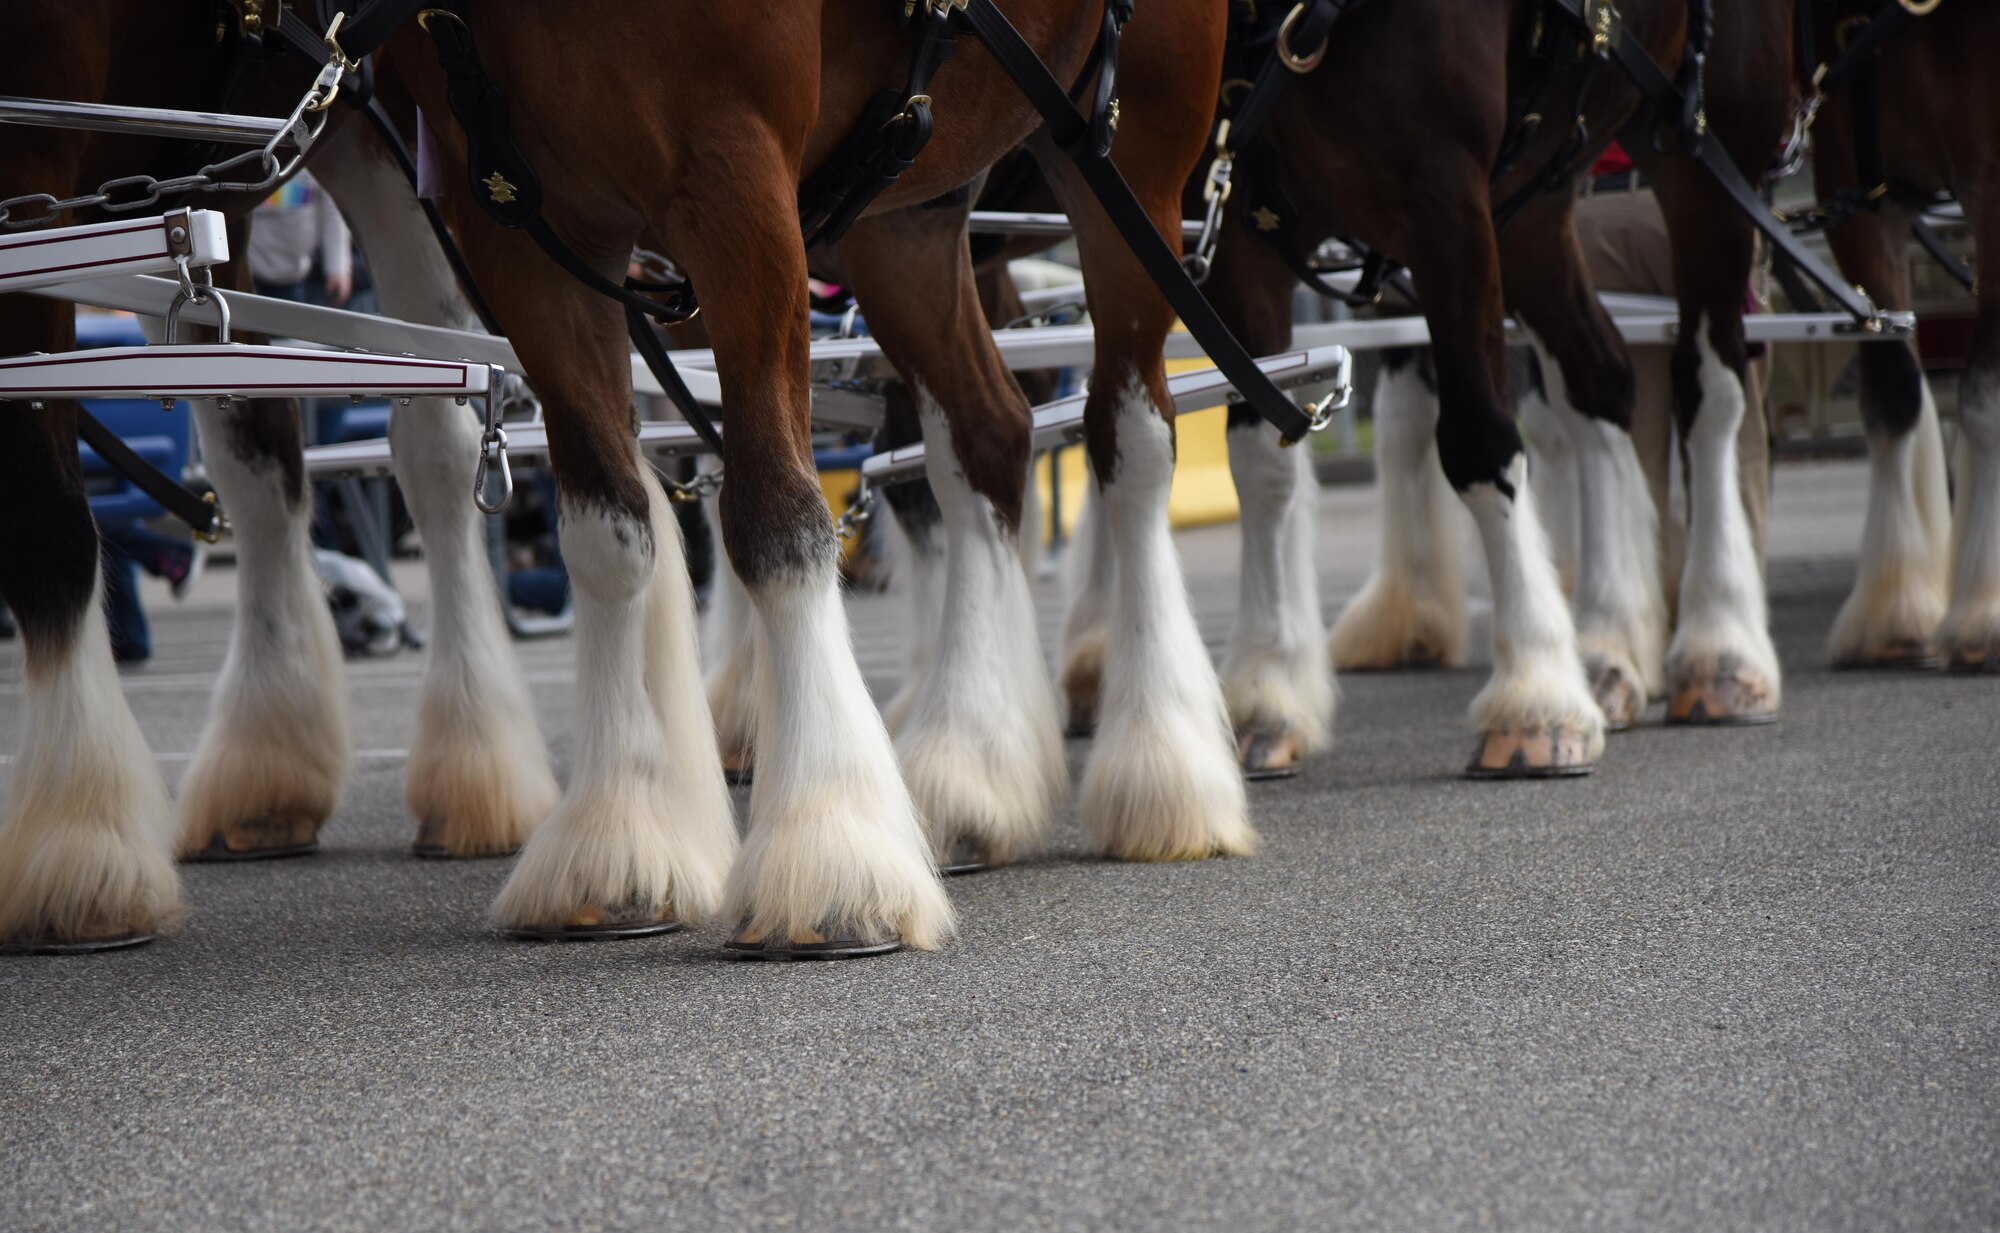 The Budweiser Clydesdales parade through the base exchange parking lot at Keesler Air Force Base, Mississippi, Feb. 7, 2019. They made their first appearance in 1933 and have been featured prominently in two presidential inaugurations. The Keesler Base Exchange hosted the event for Airmen and their families to enjoy. (U.S. Air Force photo by Kemberly Groue)